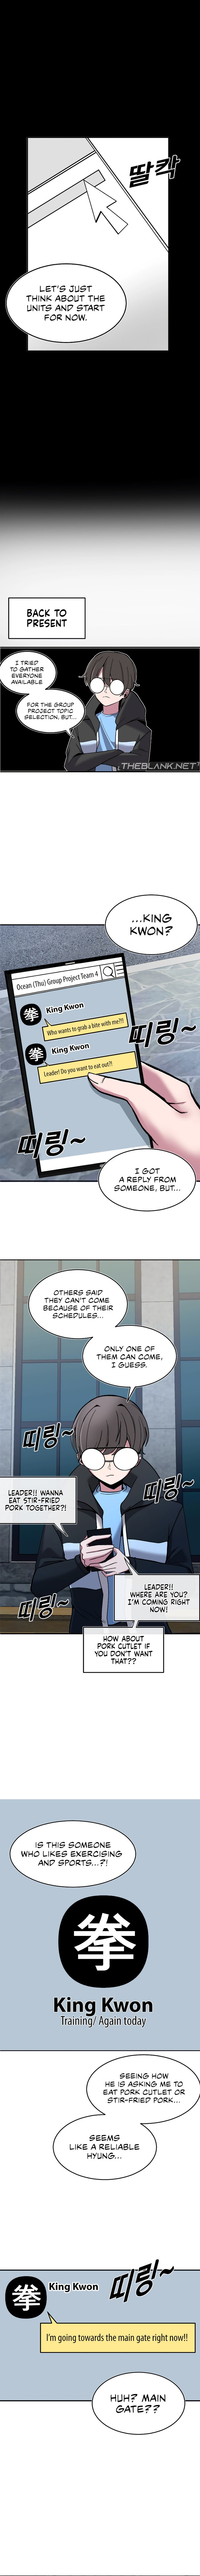 Double Life of Gukbap - Chapter 1 Page 3